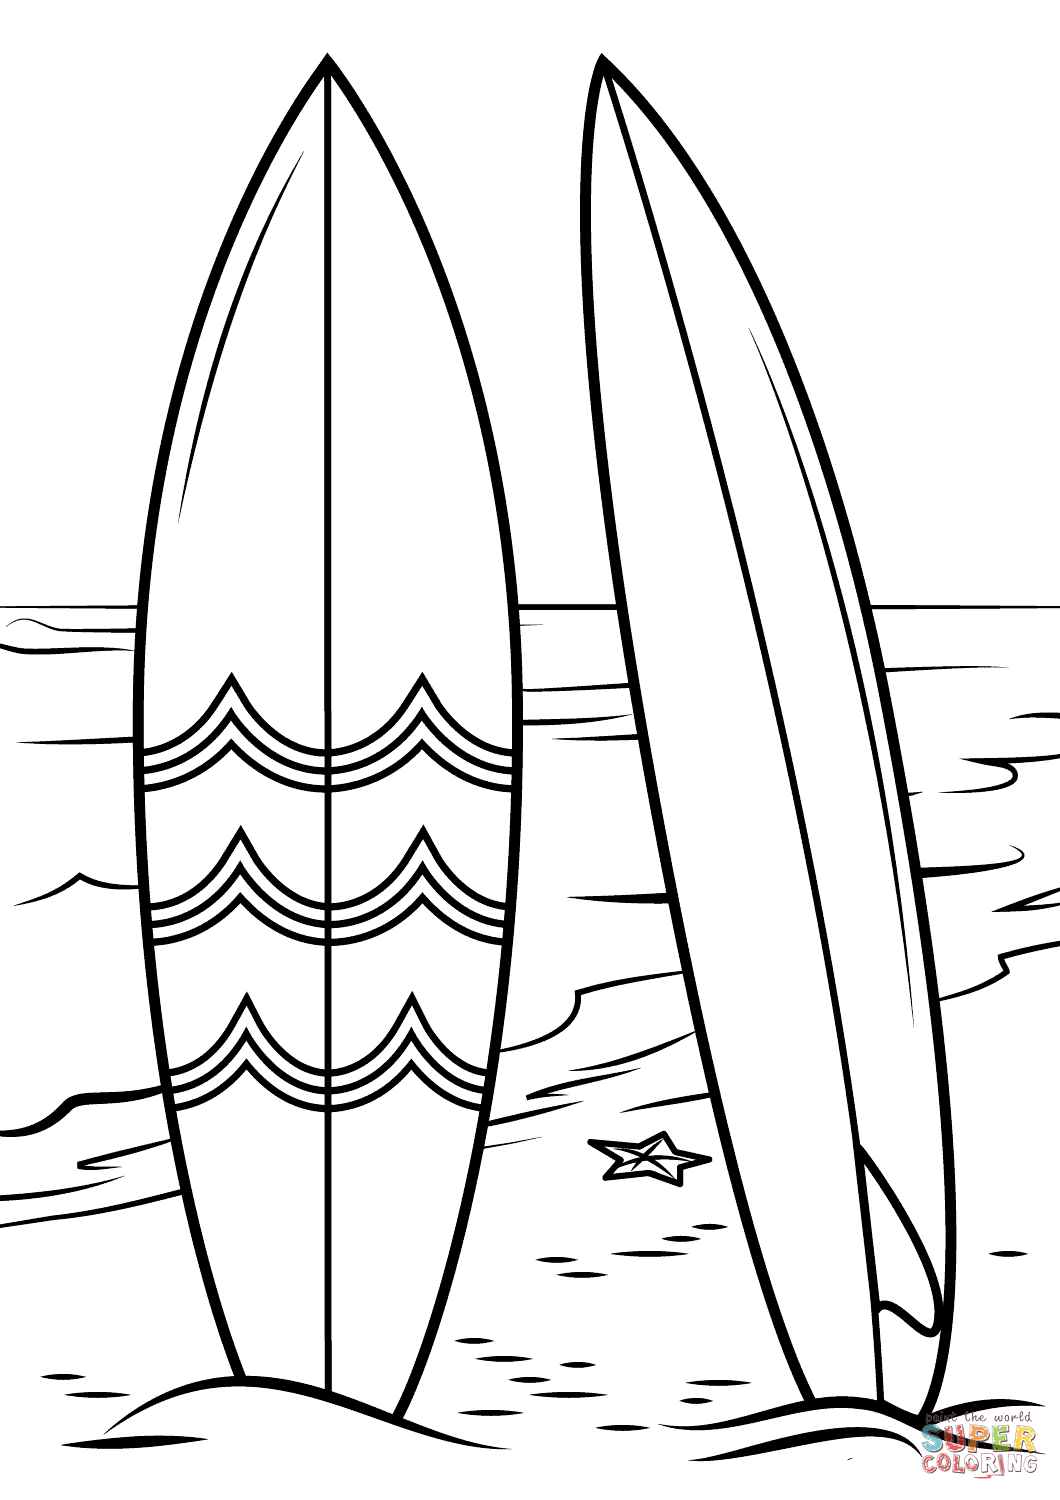 Surfboards on beach coloring page free printable coloring pages